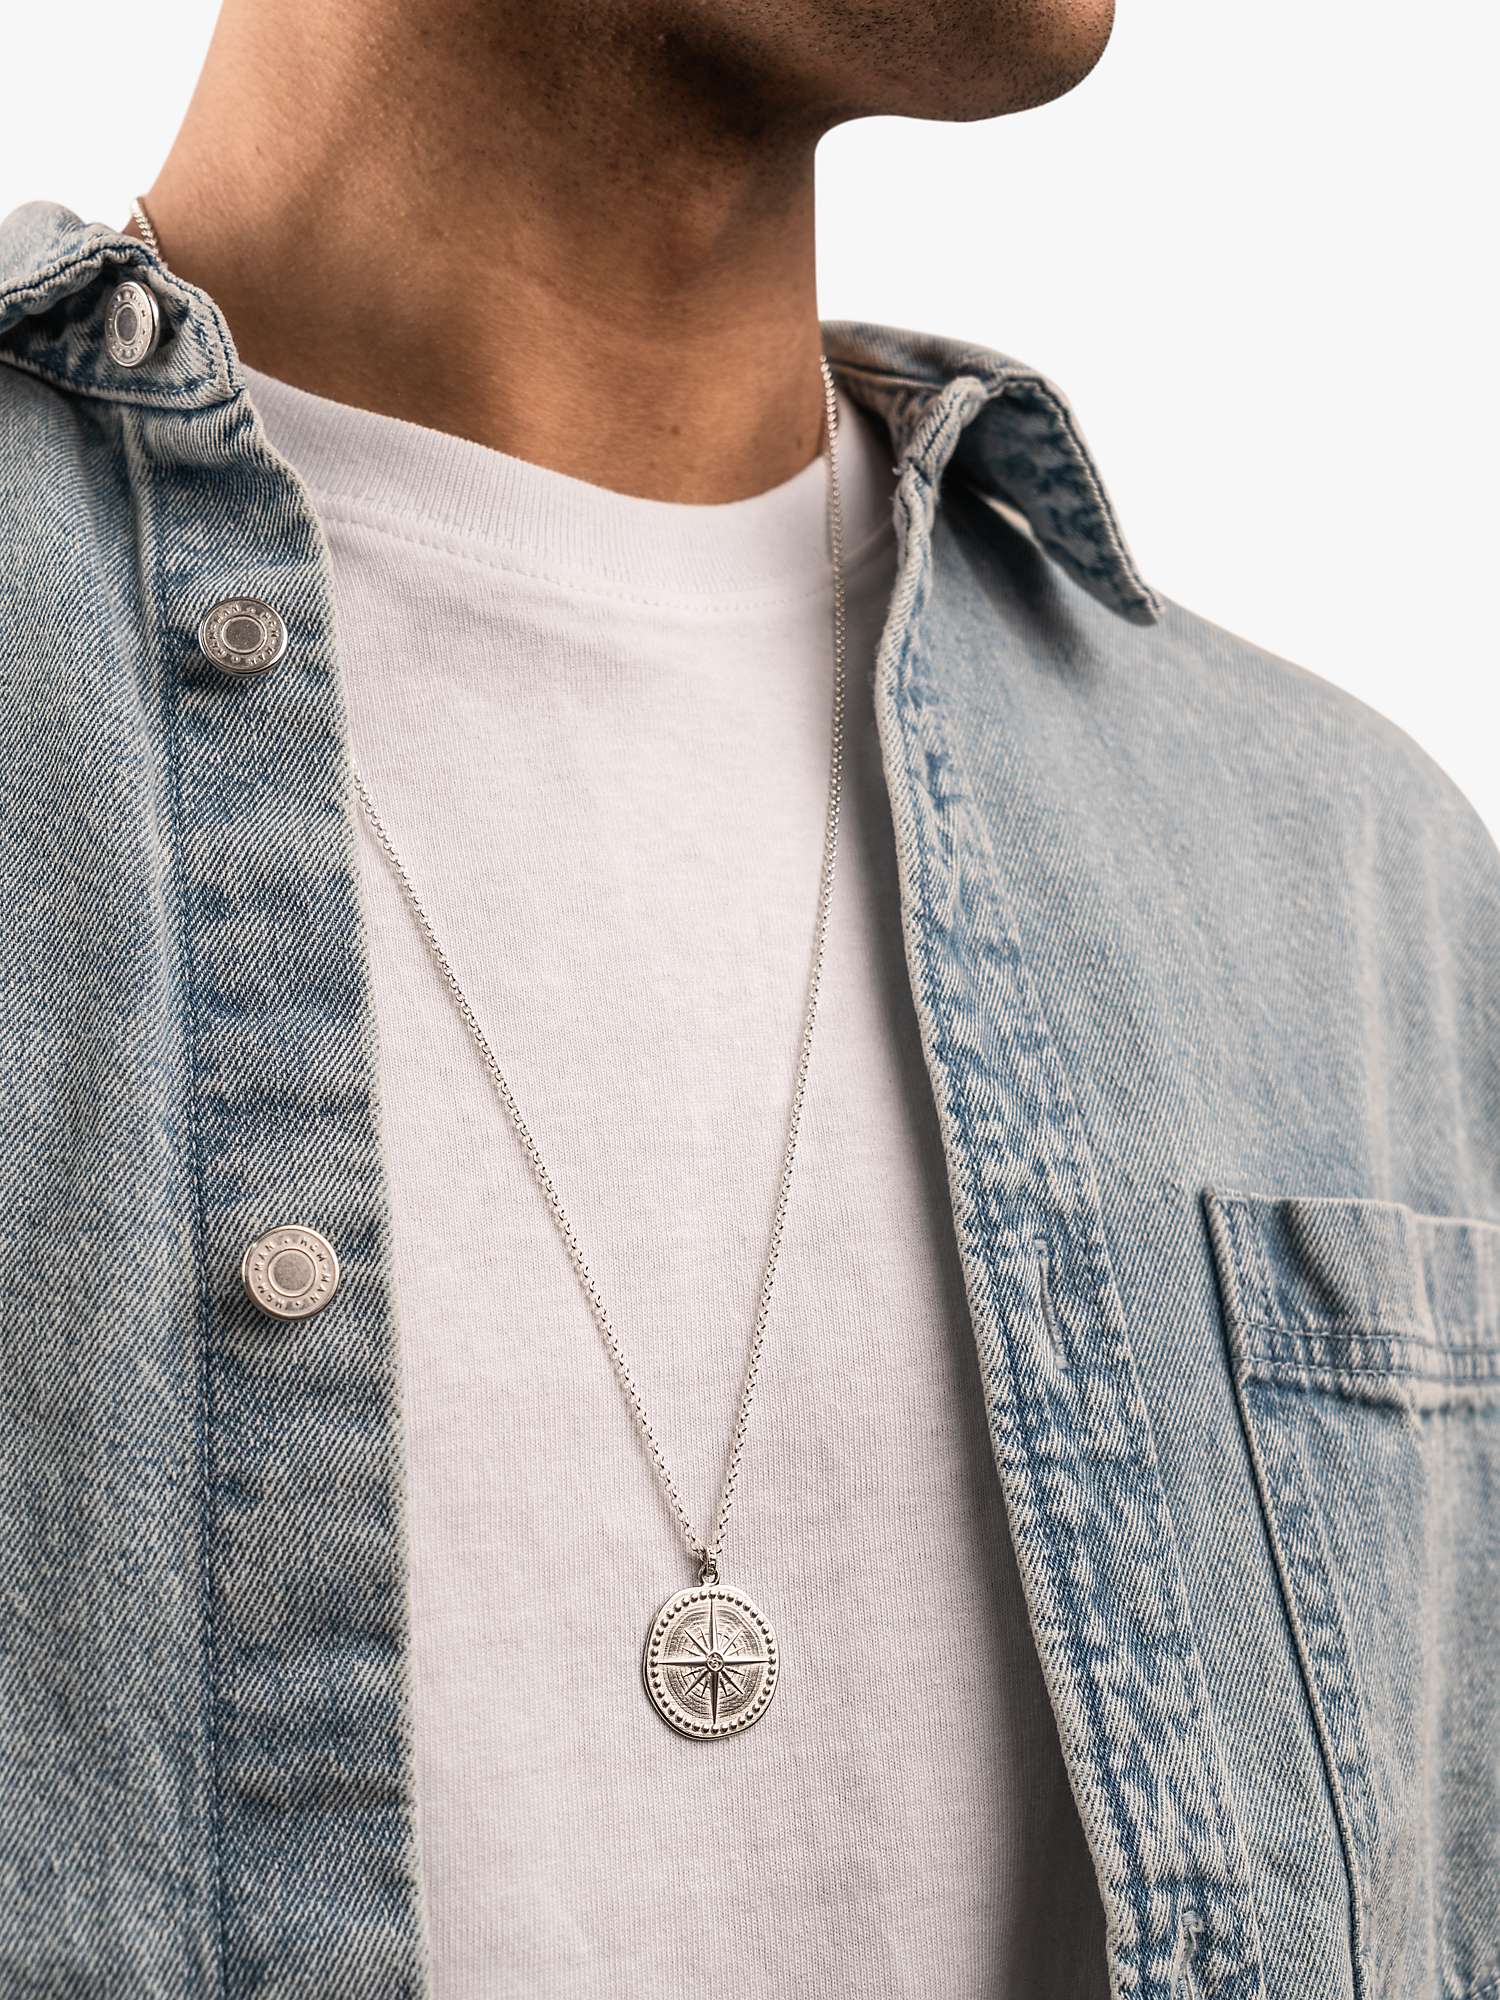 Buy Dower & Hall Men's Large True North Story Necklace, Silver Online at johnlewis.com